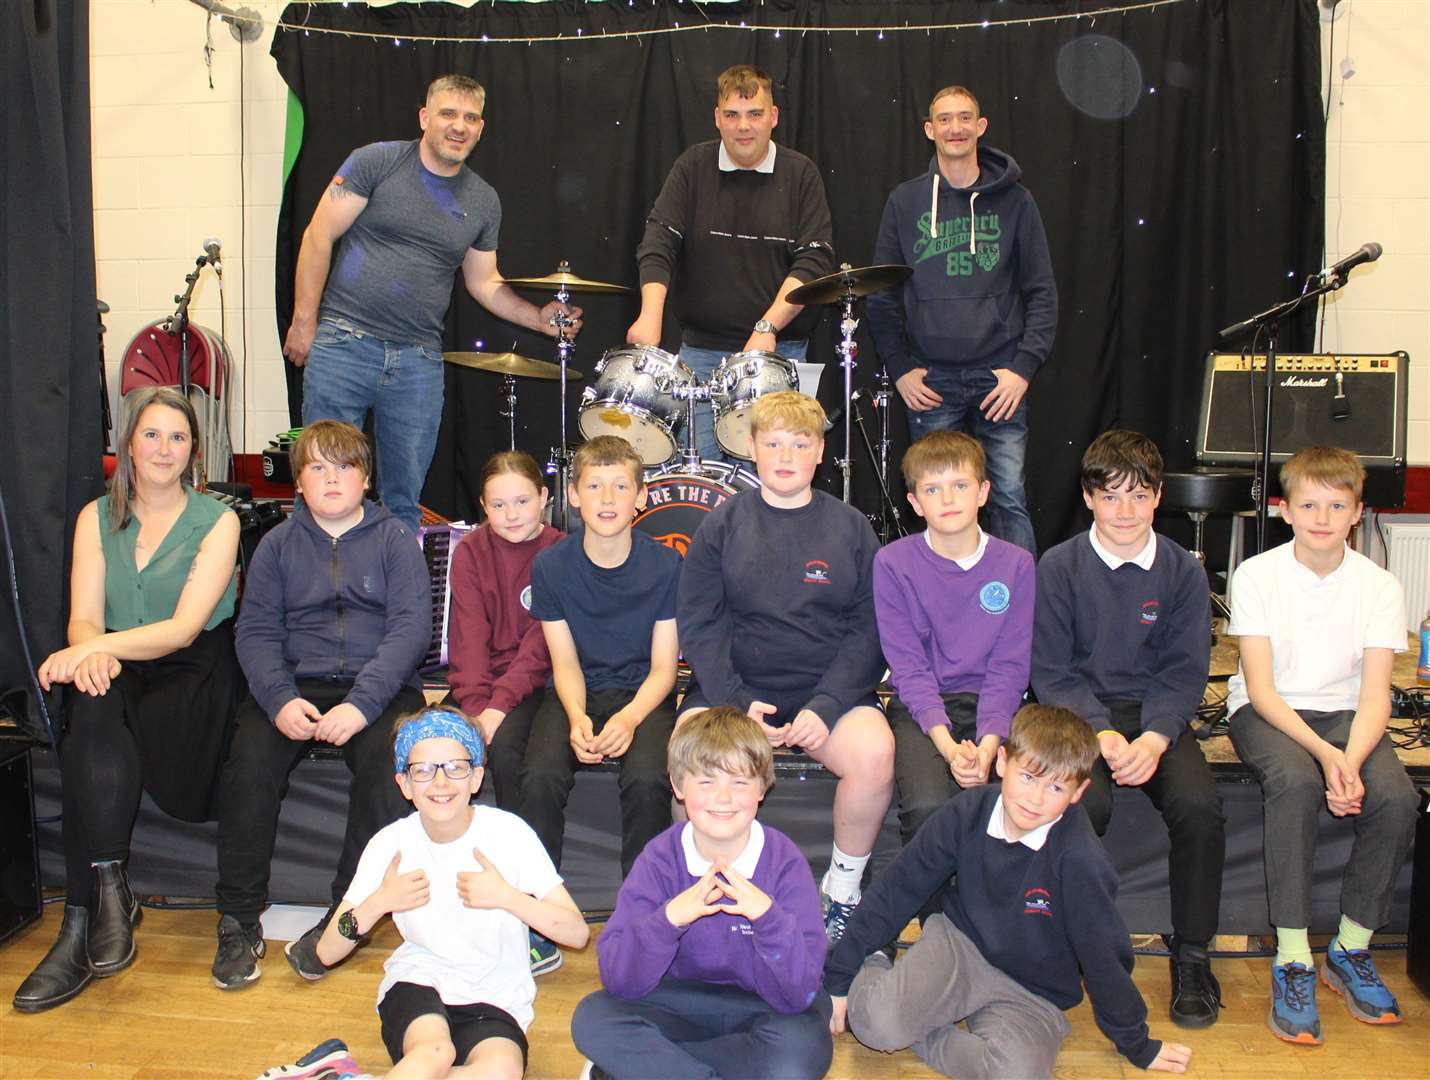 The band stayed after the concert to pose for photographs, sign autographs and chat to pupils and staff.